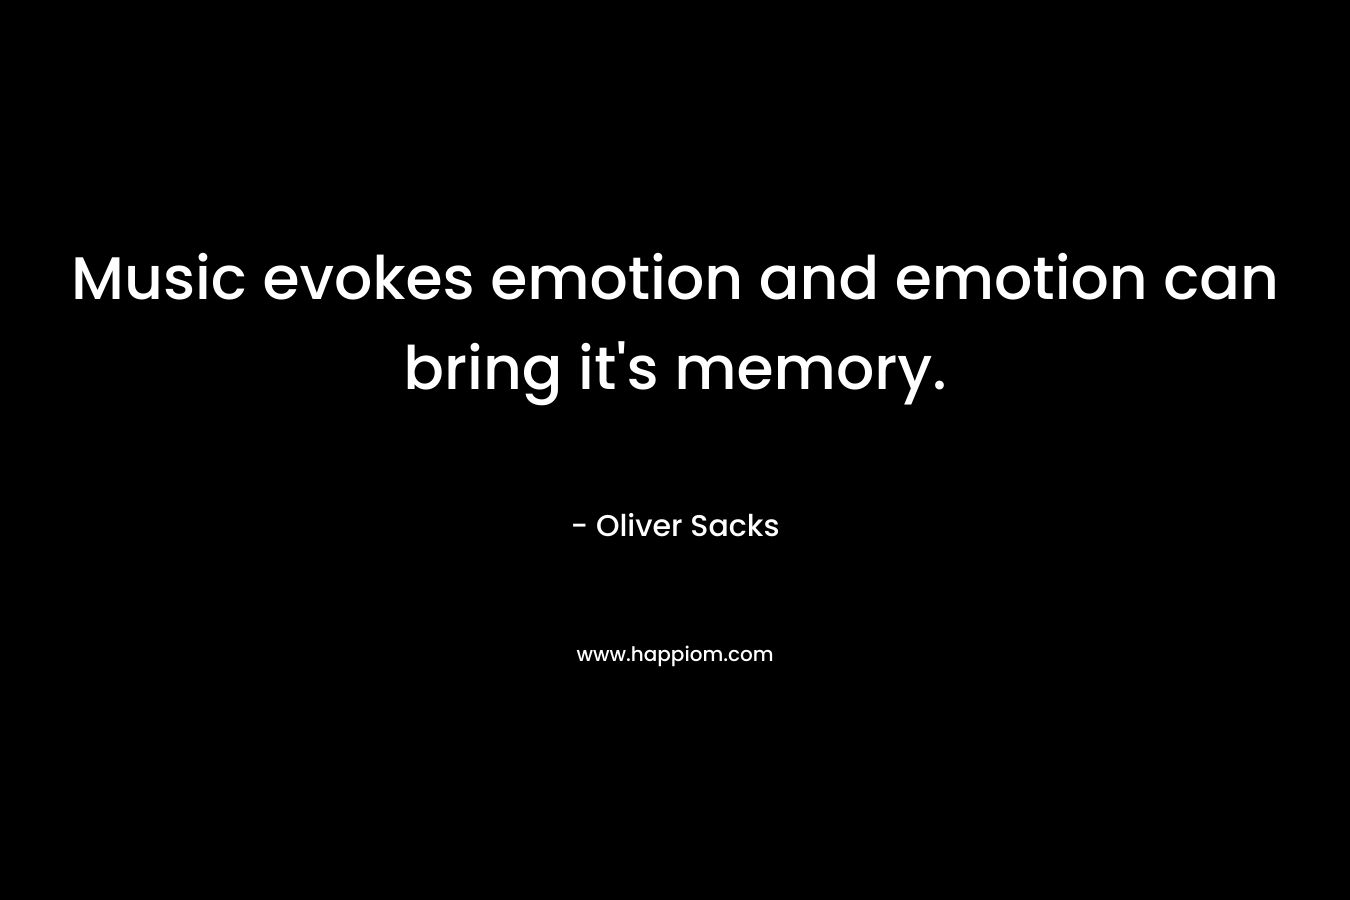 Music evokes emotion and emotion can bring it's memory.